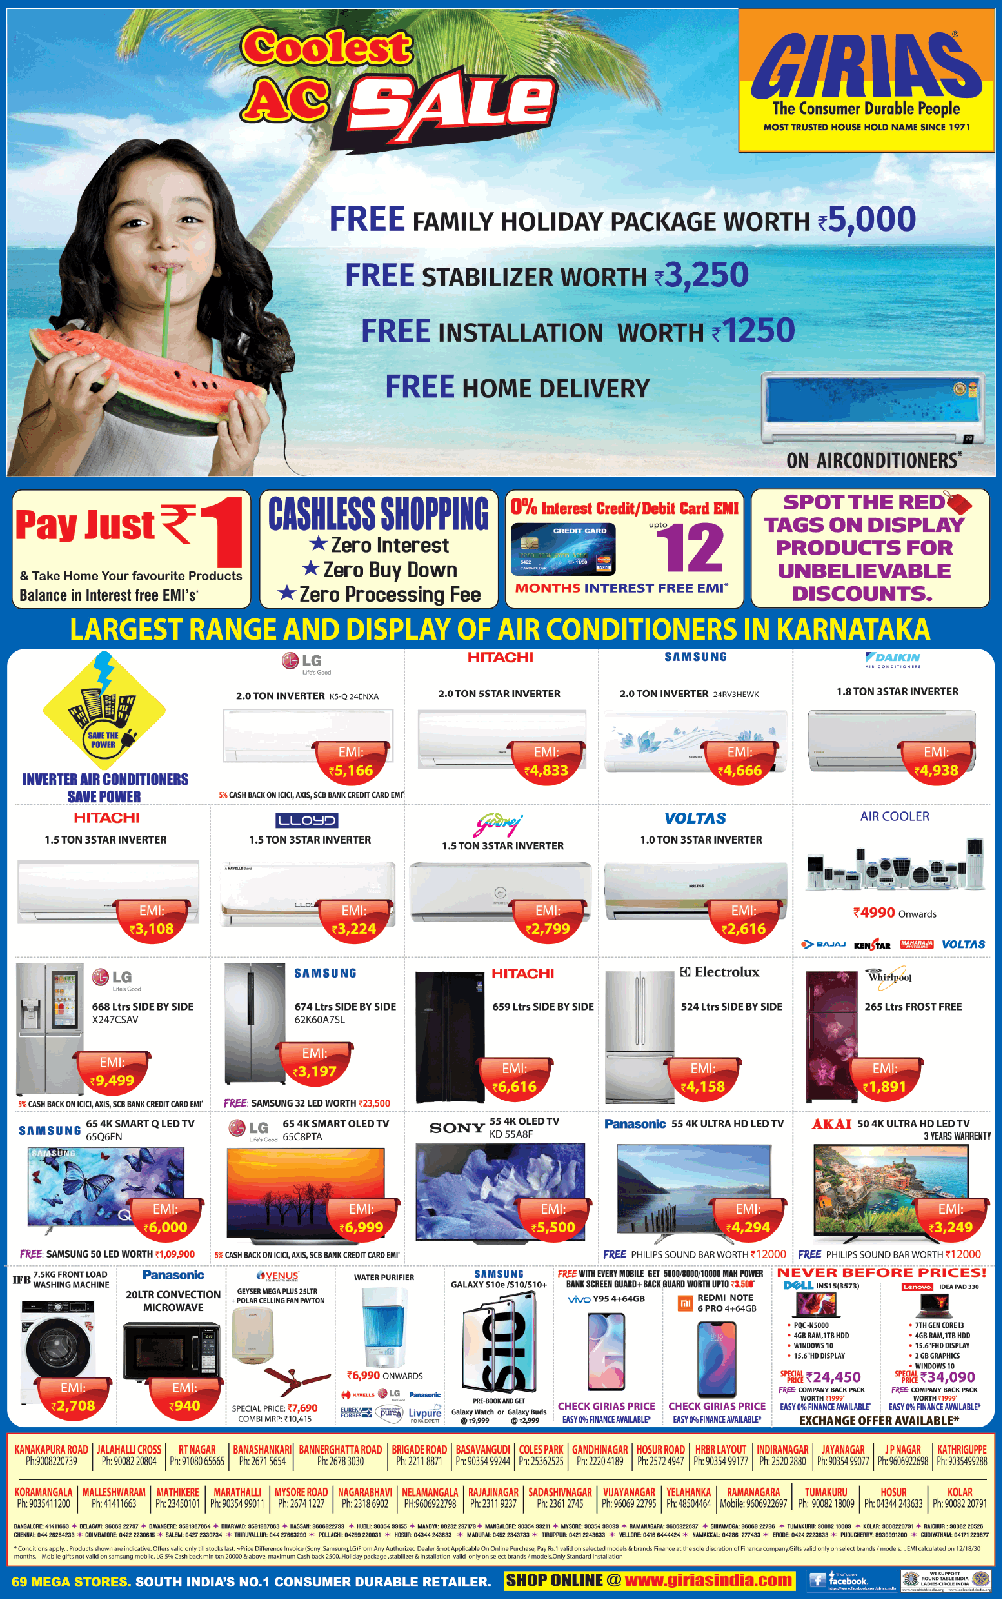 girias-collest-ac-sale-pay-just-rs-1-and-buy-anything-ad-bangalore-times-02-03-2019.png